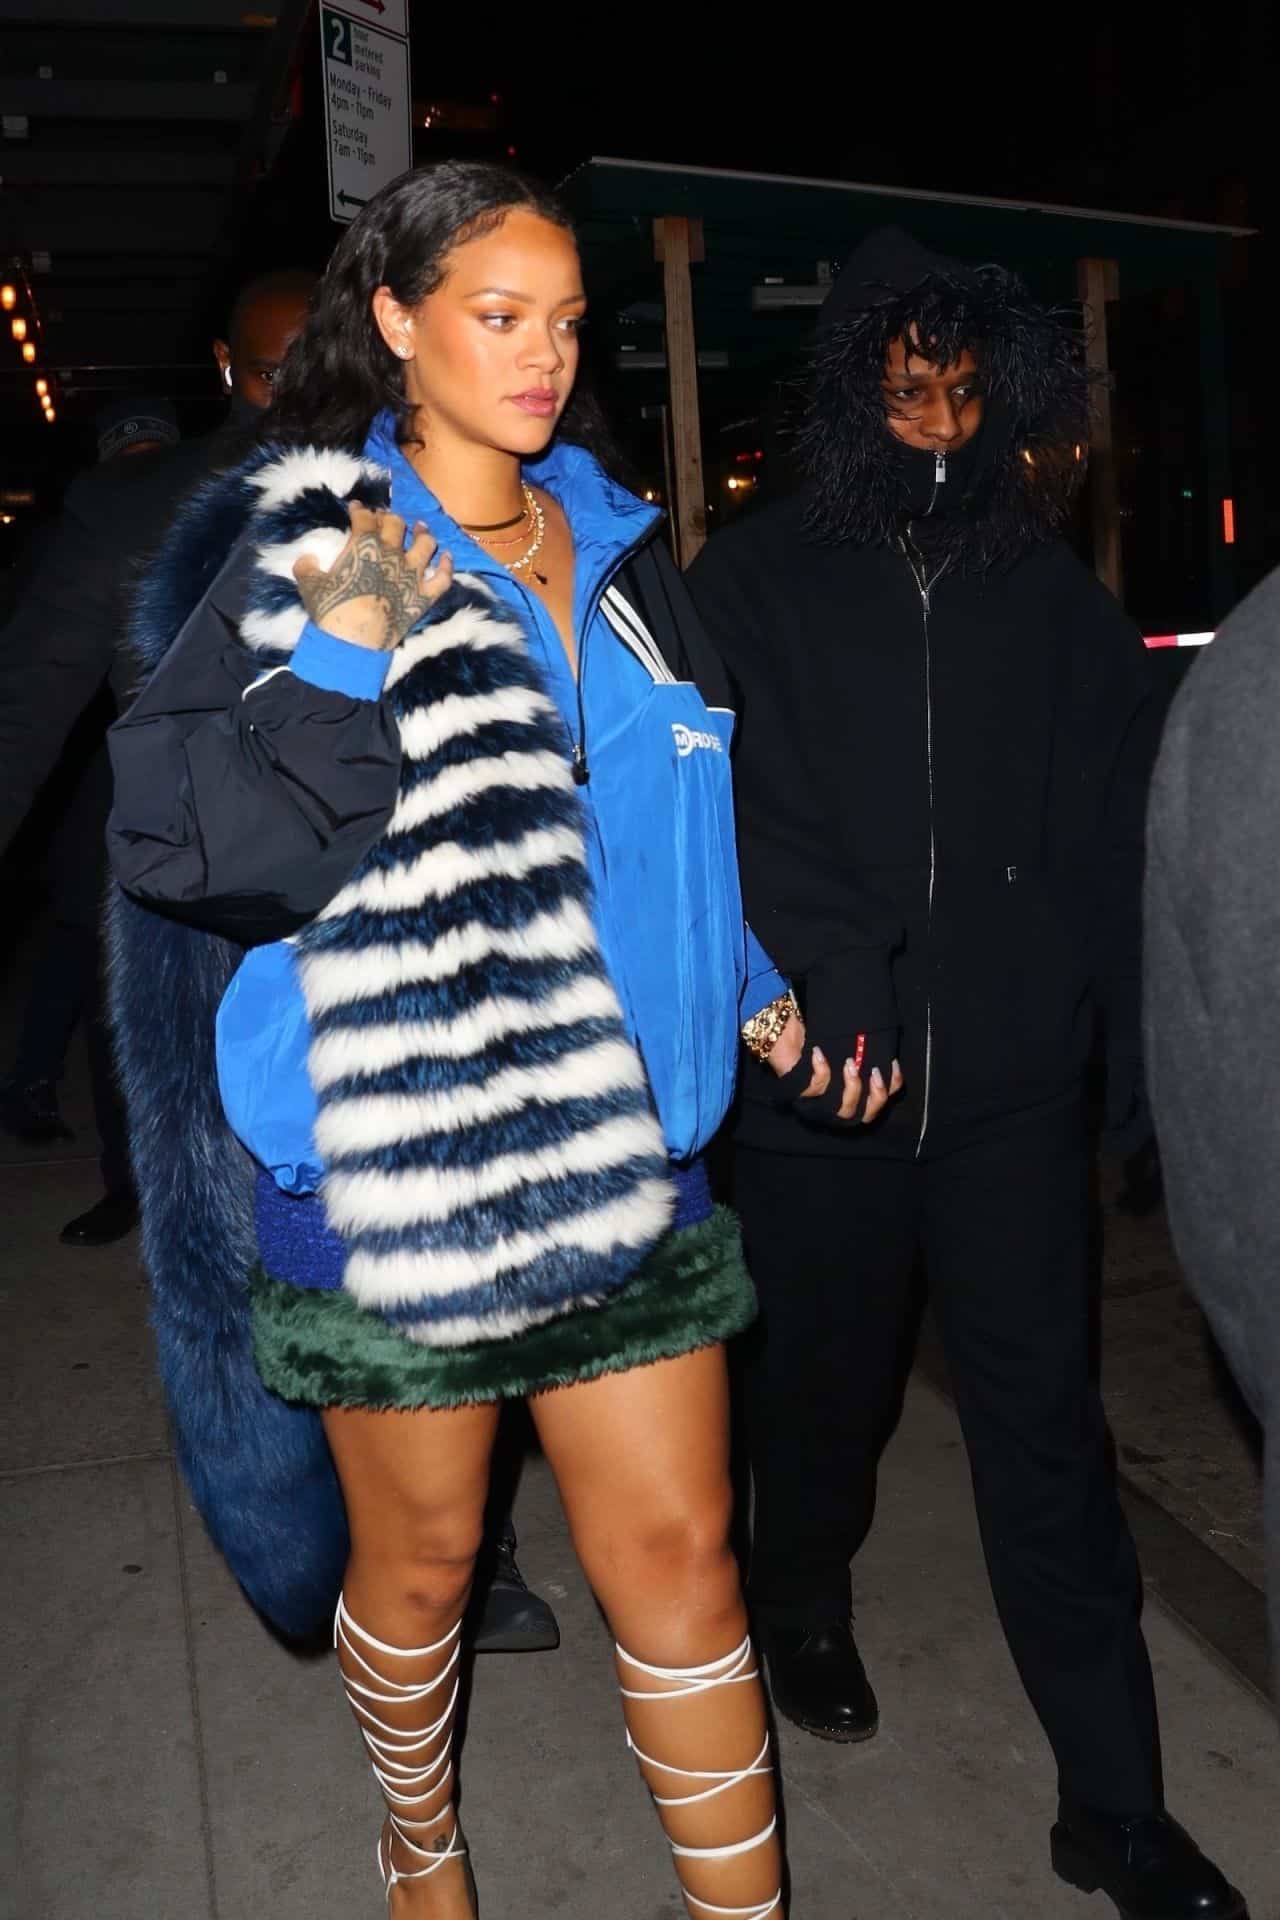 Rihanna and ASAP Rocky Held Hands as They Left the Pastis Restaurant in NY